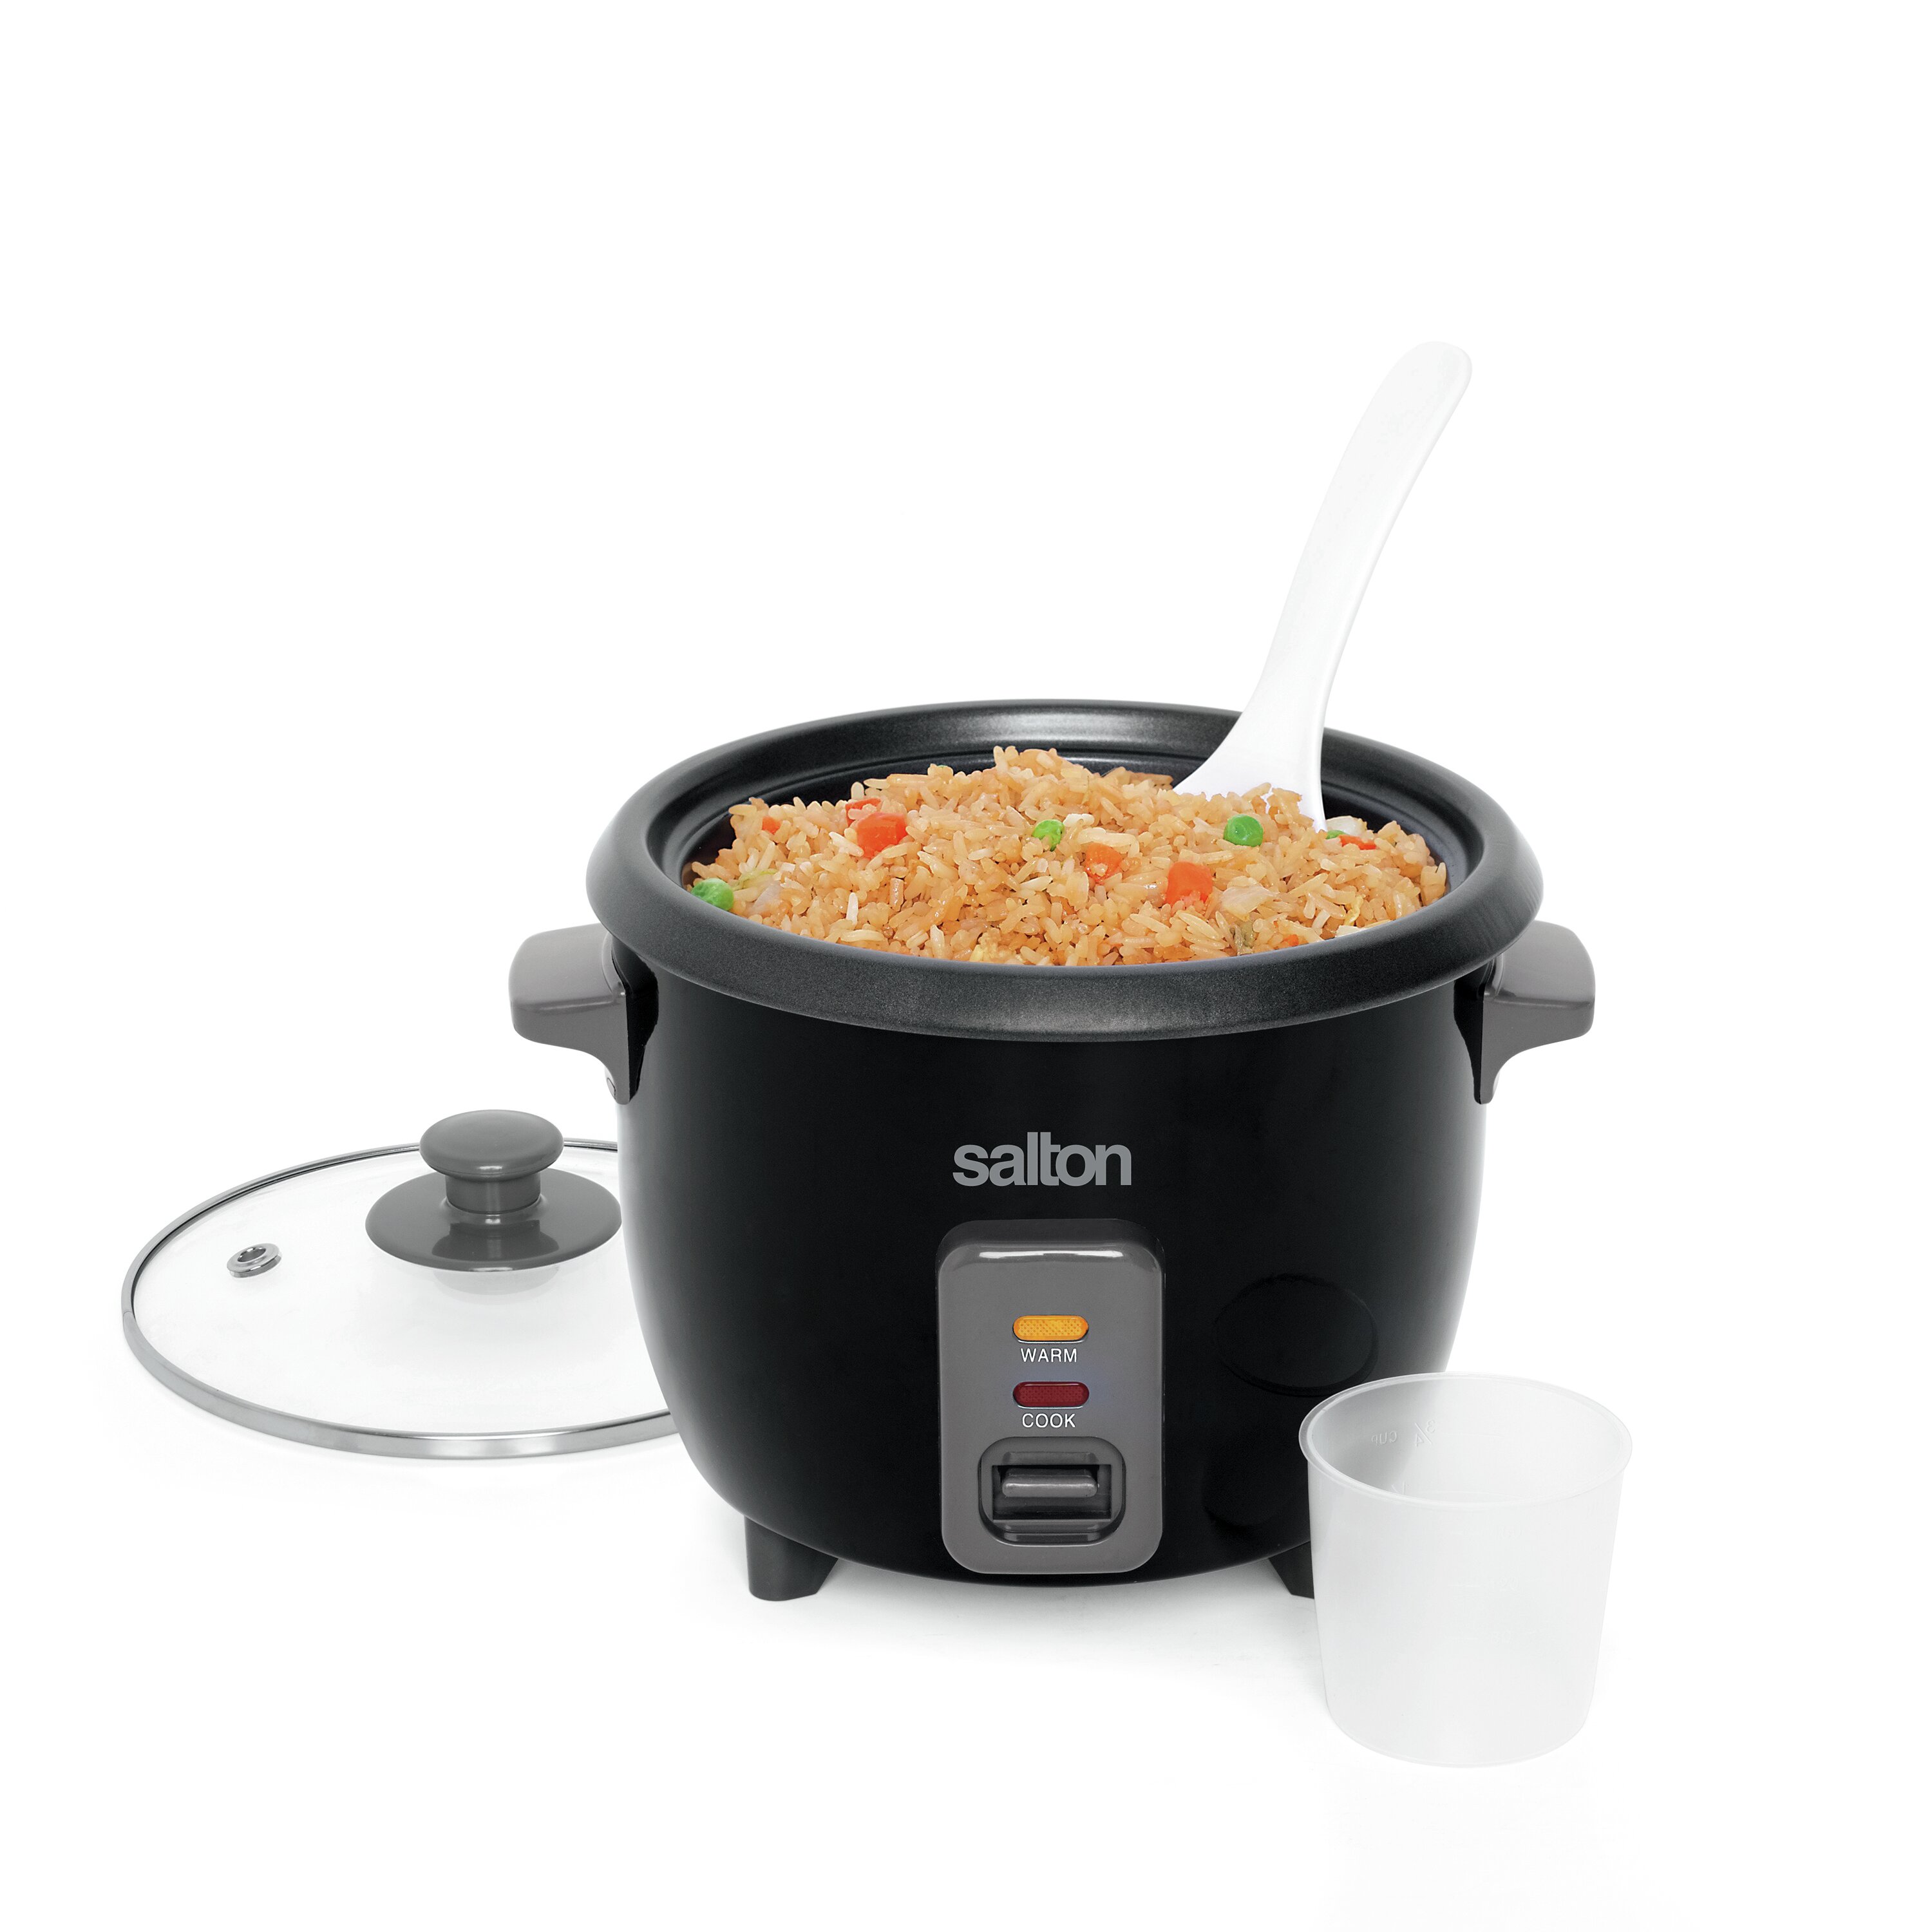 Premium LEVELLA 6-Cup Black Rice Cooker and Rice Steamer with Non